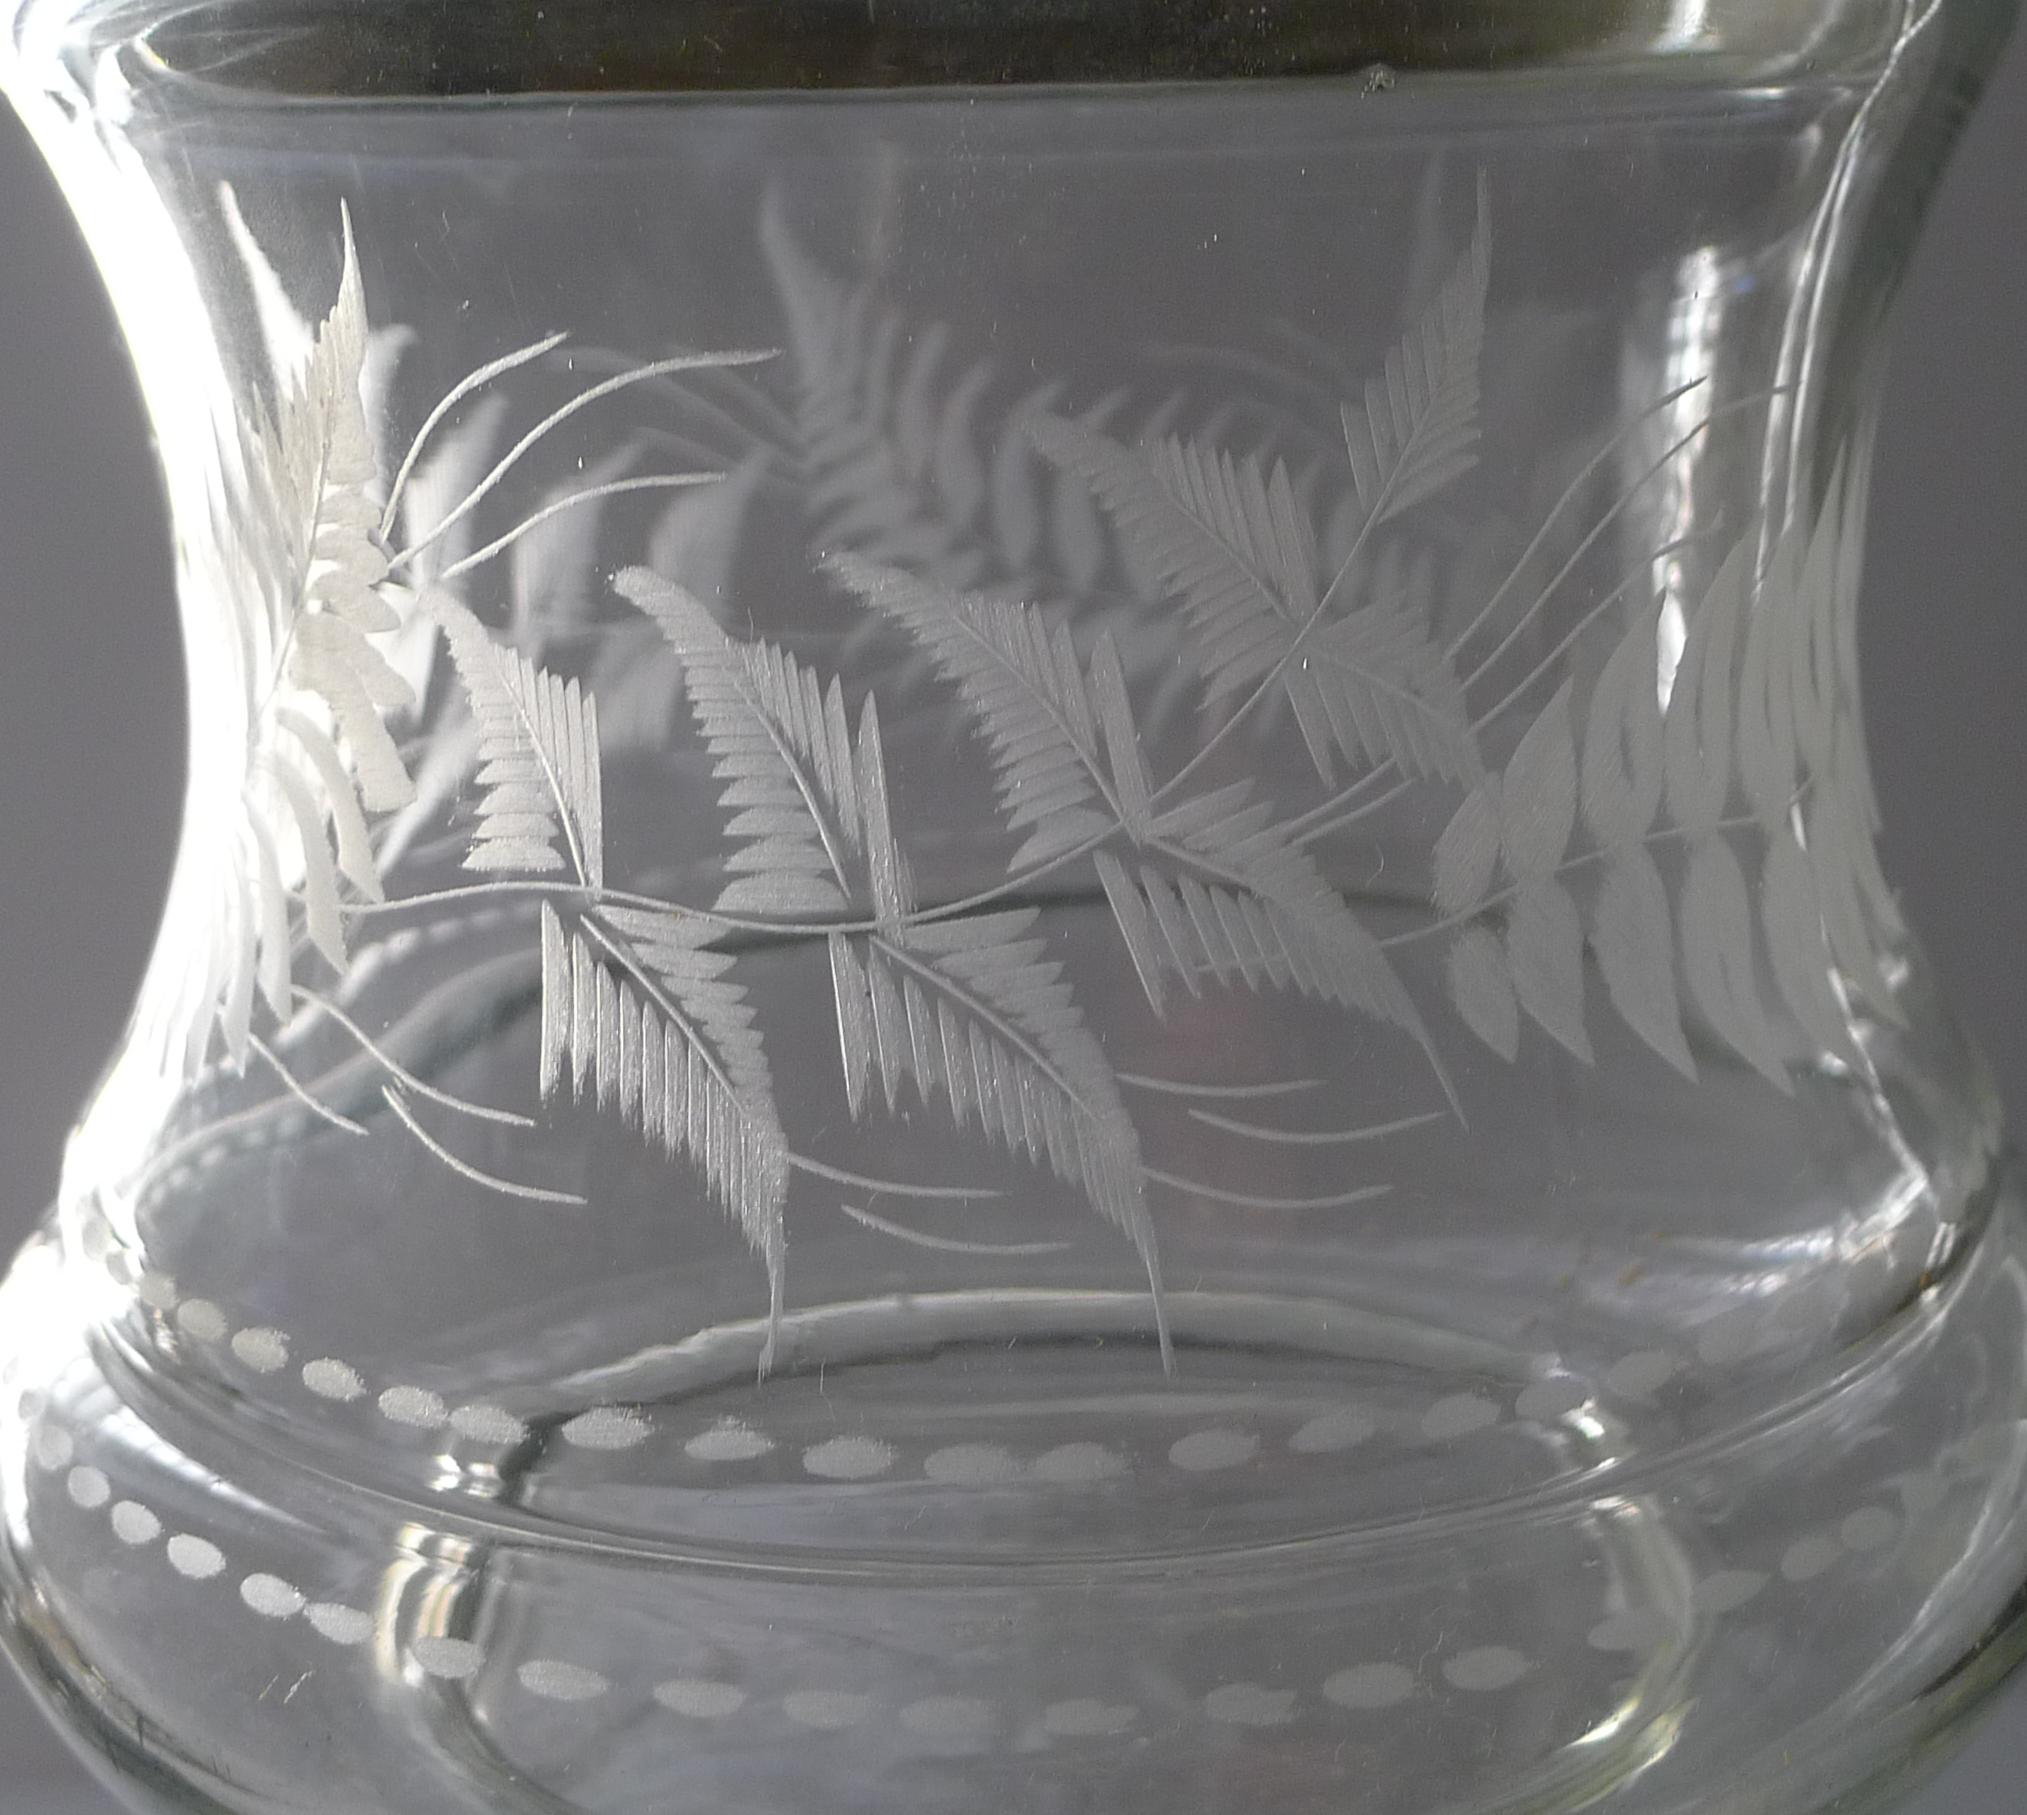 A delightful late Victorian biscuit barrel or box dating to around 1890. The glass is a lovely and unusual shape and beautifully decorated with engraved Ferns all around, so very English and so very Victorian.

To the Victorians, ferns encapsulated